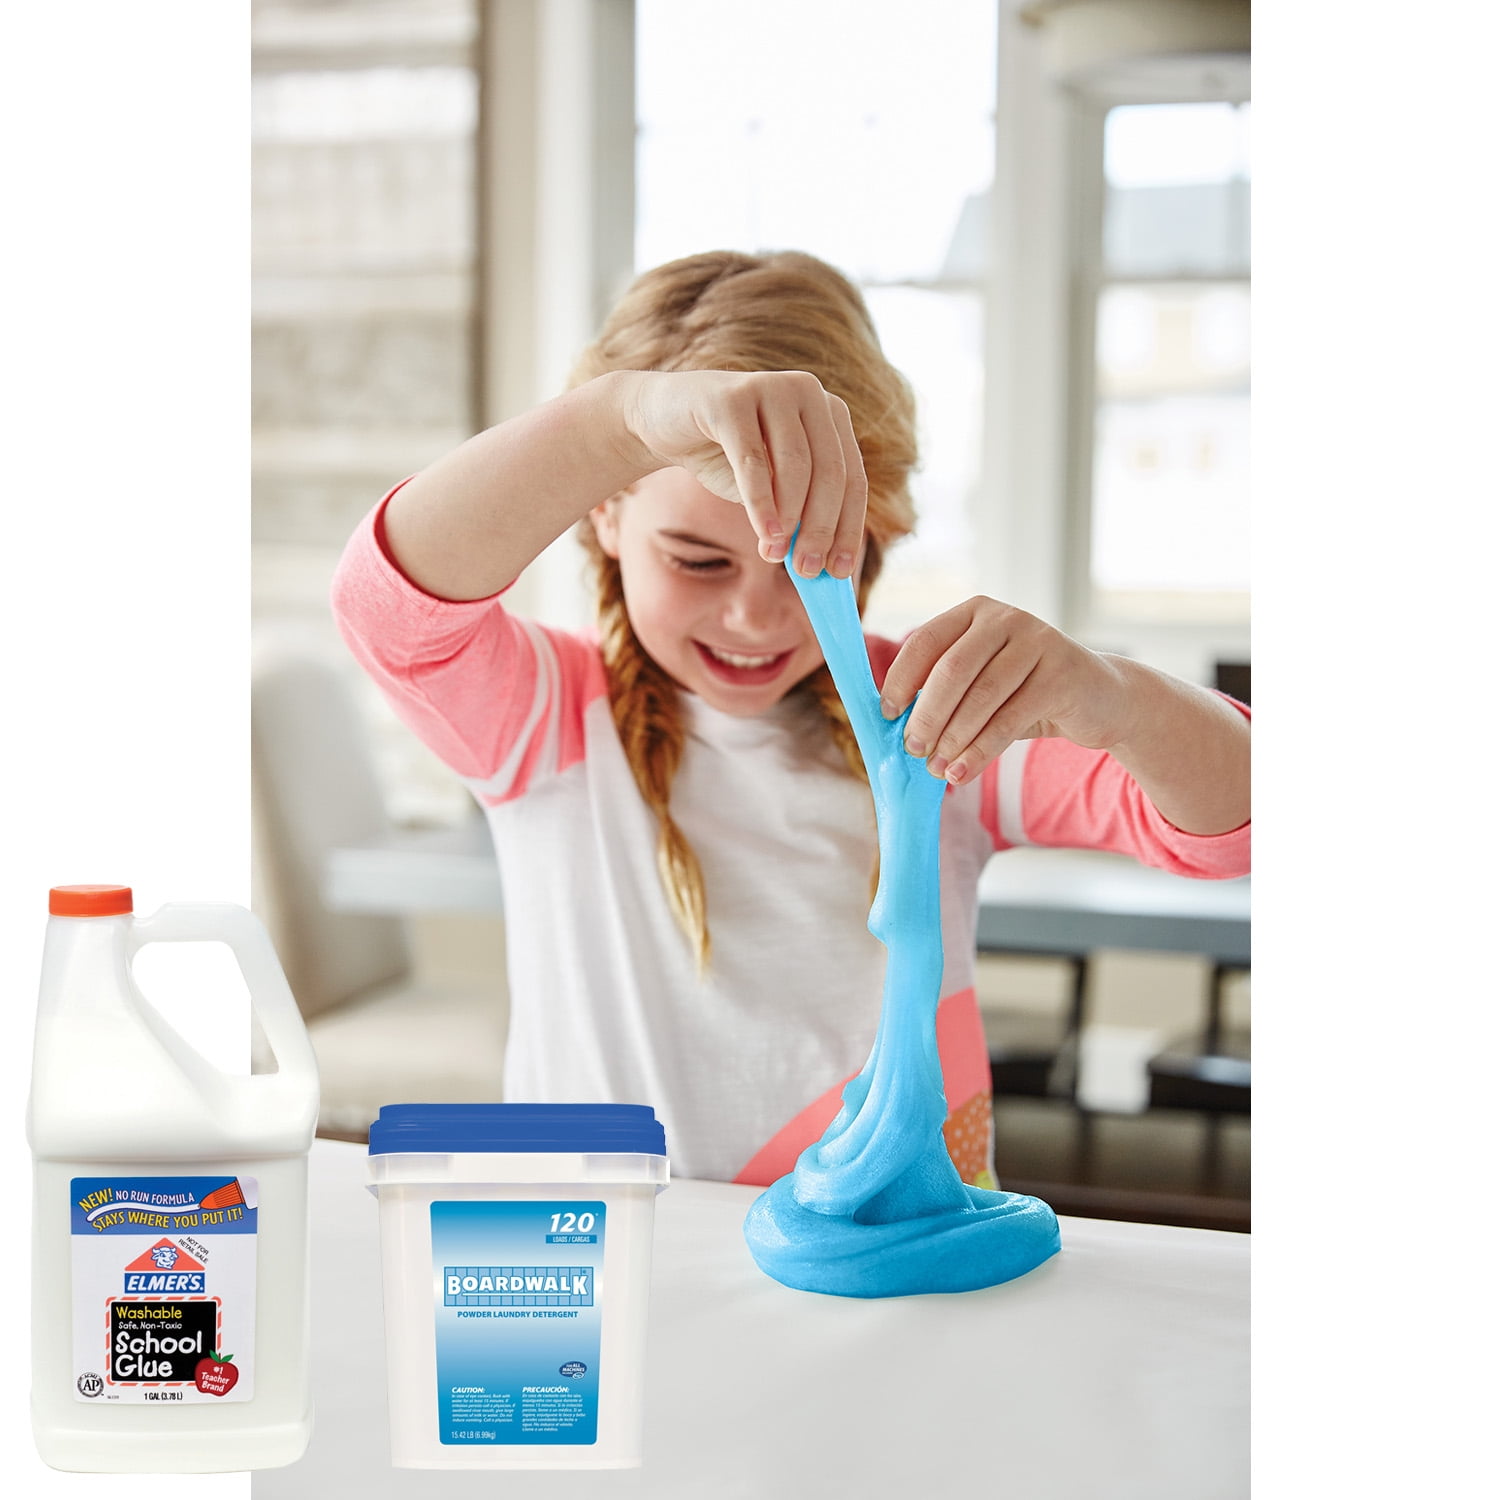 DIY Slime Kit with Elmer's School Glue and Laundry Detergent Powder